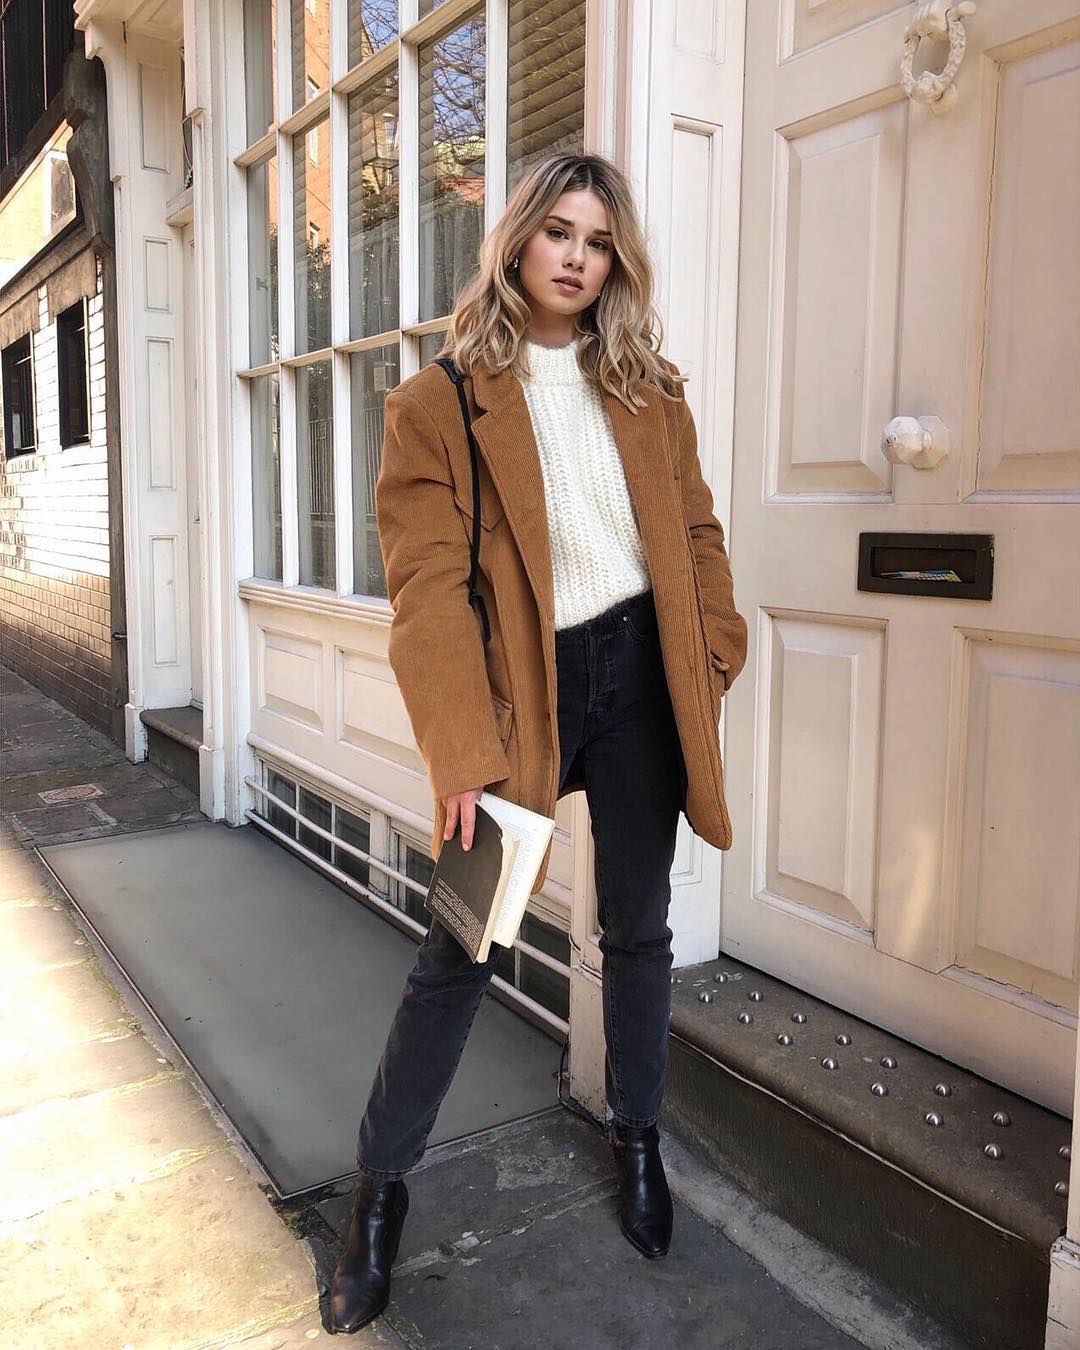 A Stylish Everyday Winter Outfit Idea to Try Now — Iga Wysocka in a camel jacket, white sweater, black jeans, and boots